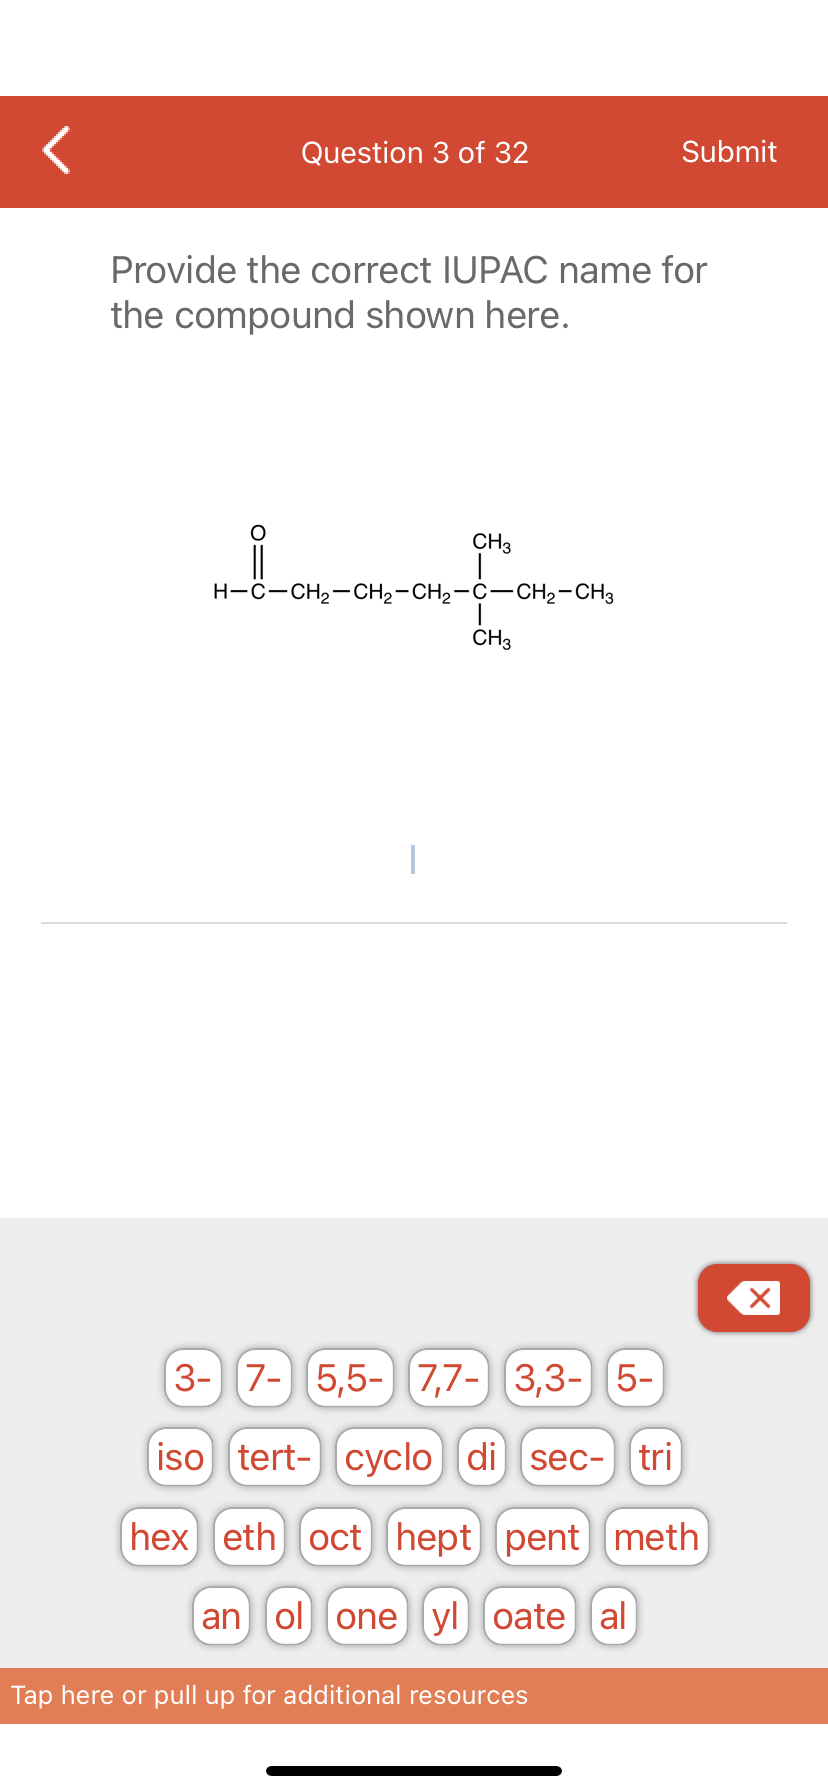 Question 3 of 32
Provide the correct IUPAC name for
the compound shown here.
CH3
for-on
CH3
H-C-CH₂-CH₂-CH₂-C-CH₂-CH3
1
Submit
3- 7- 5,5-7,7- 3,3- 5-
iso tert- cyclo di sec- tri
(hex) eth) oct] [hept pent meth
an ol one yl oate al
Tap here or pull up for additional resources
X